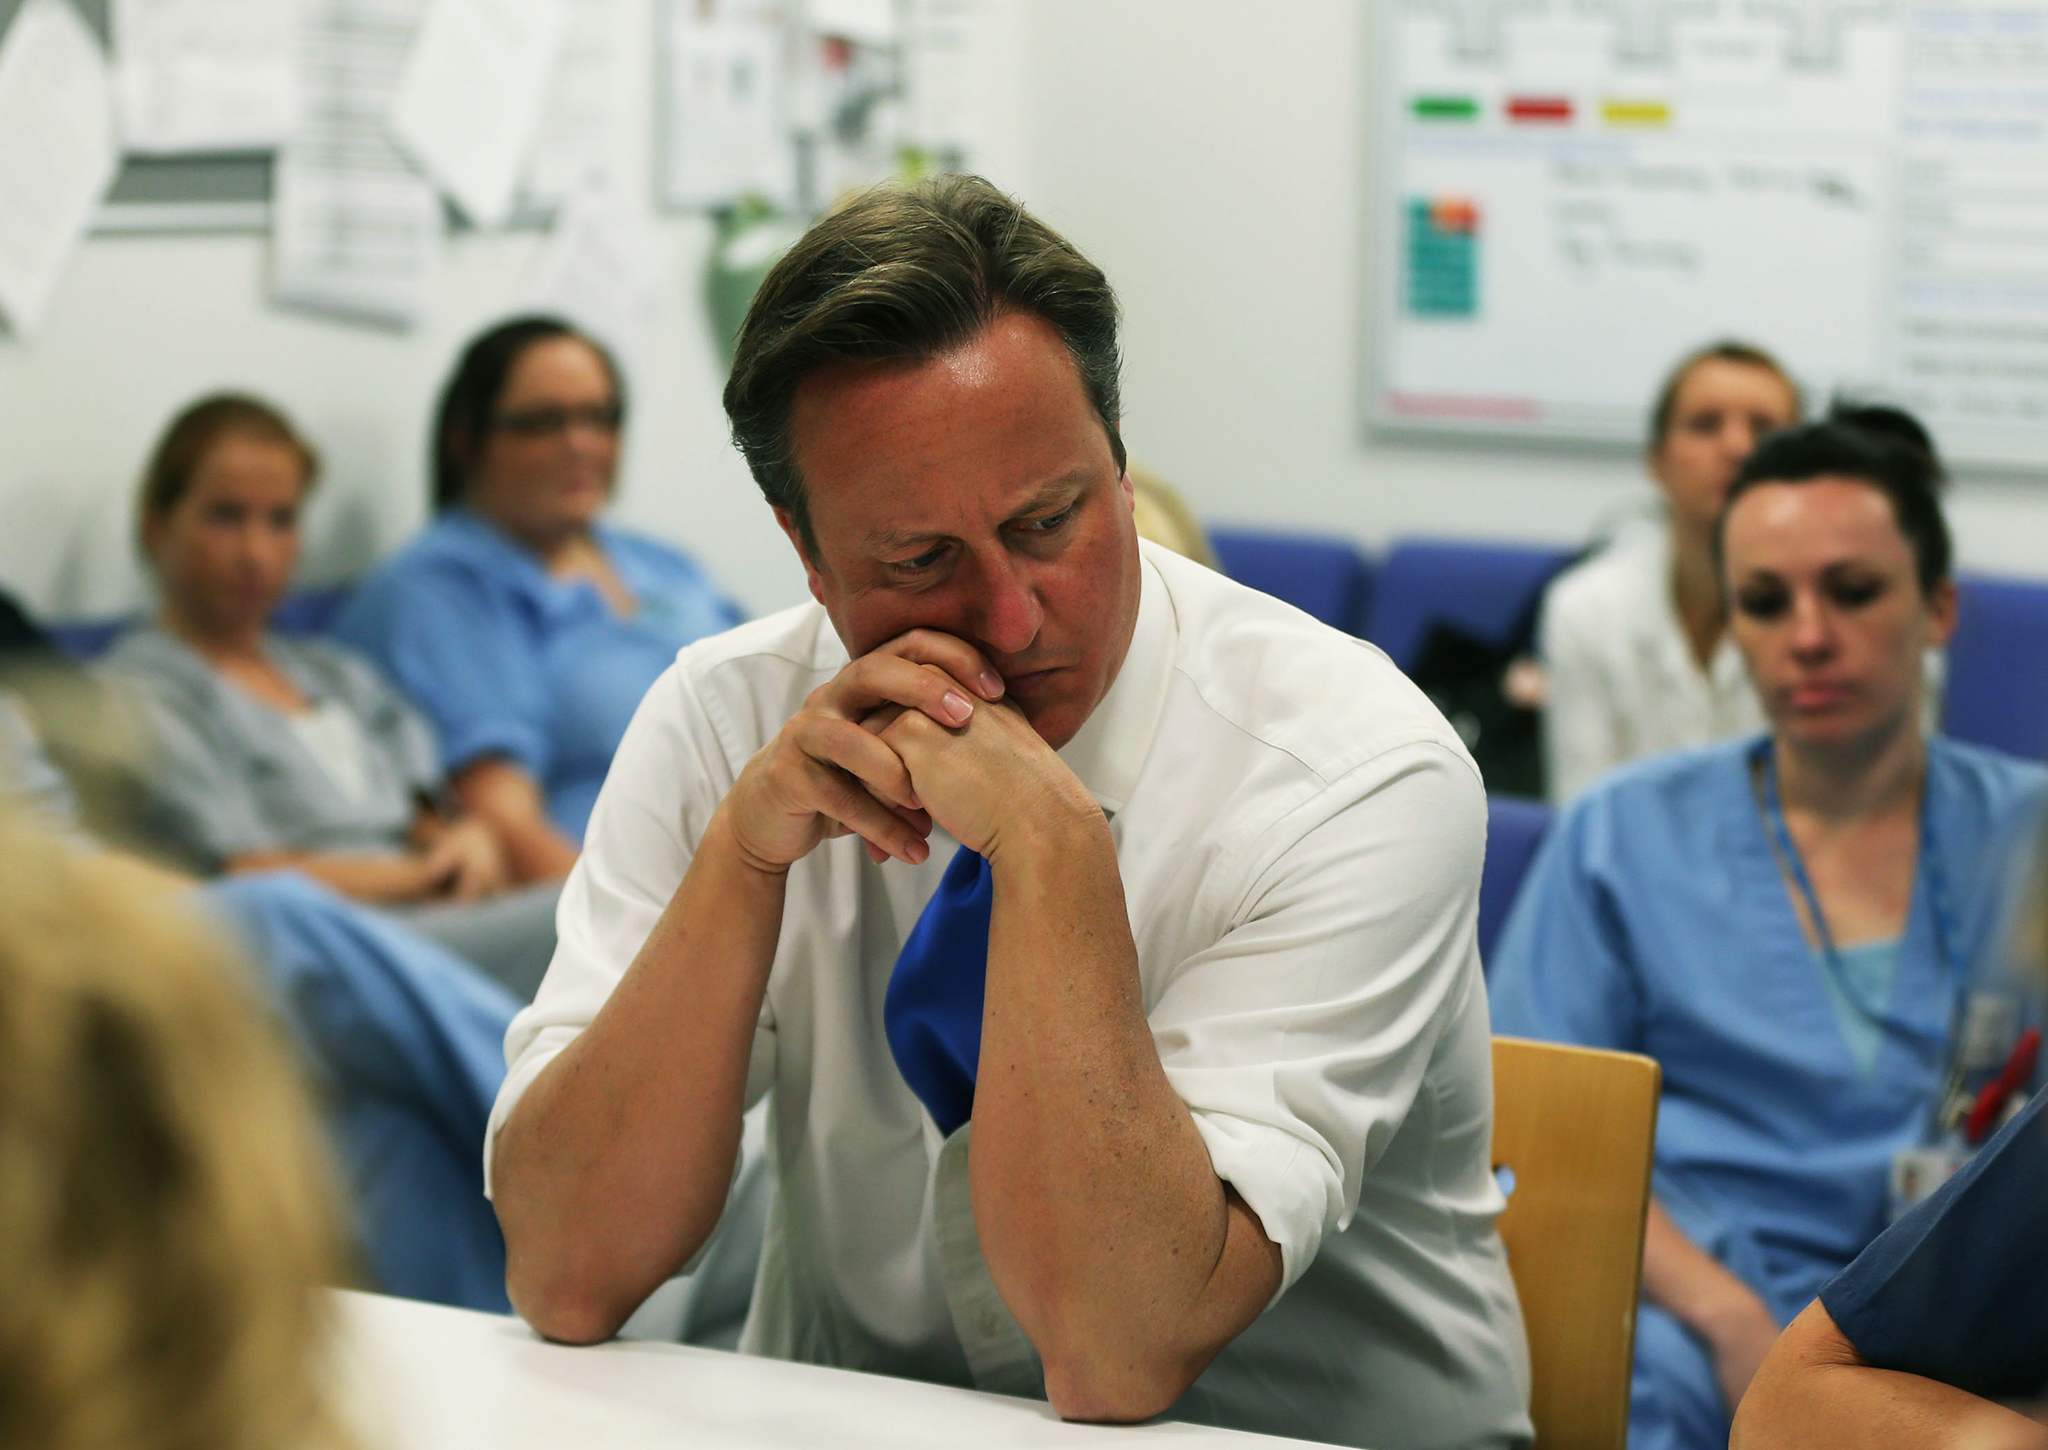 David Cameron talks to staff during a visit to the Salford Royal Hospital accident and emergency department